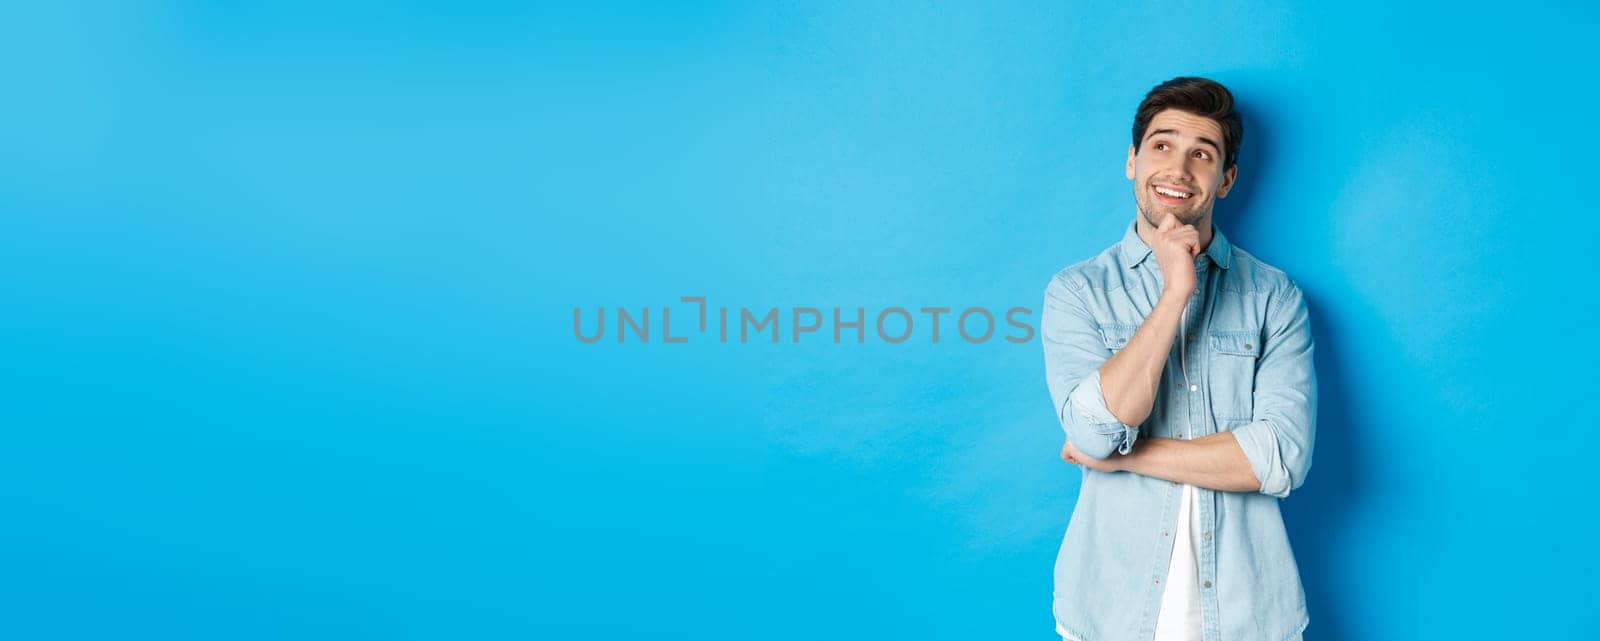 Portrait of thoughtful handsome man with beard, standing in casual outfit, looking at upper left corner and smiling, imaging or dreaming about something, standing over blue background.